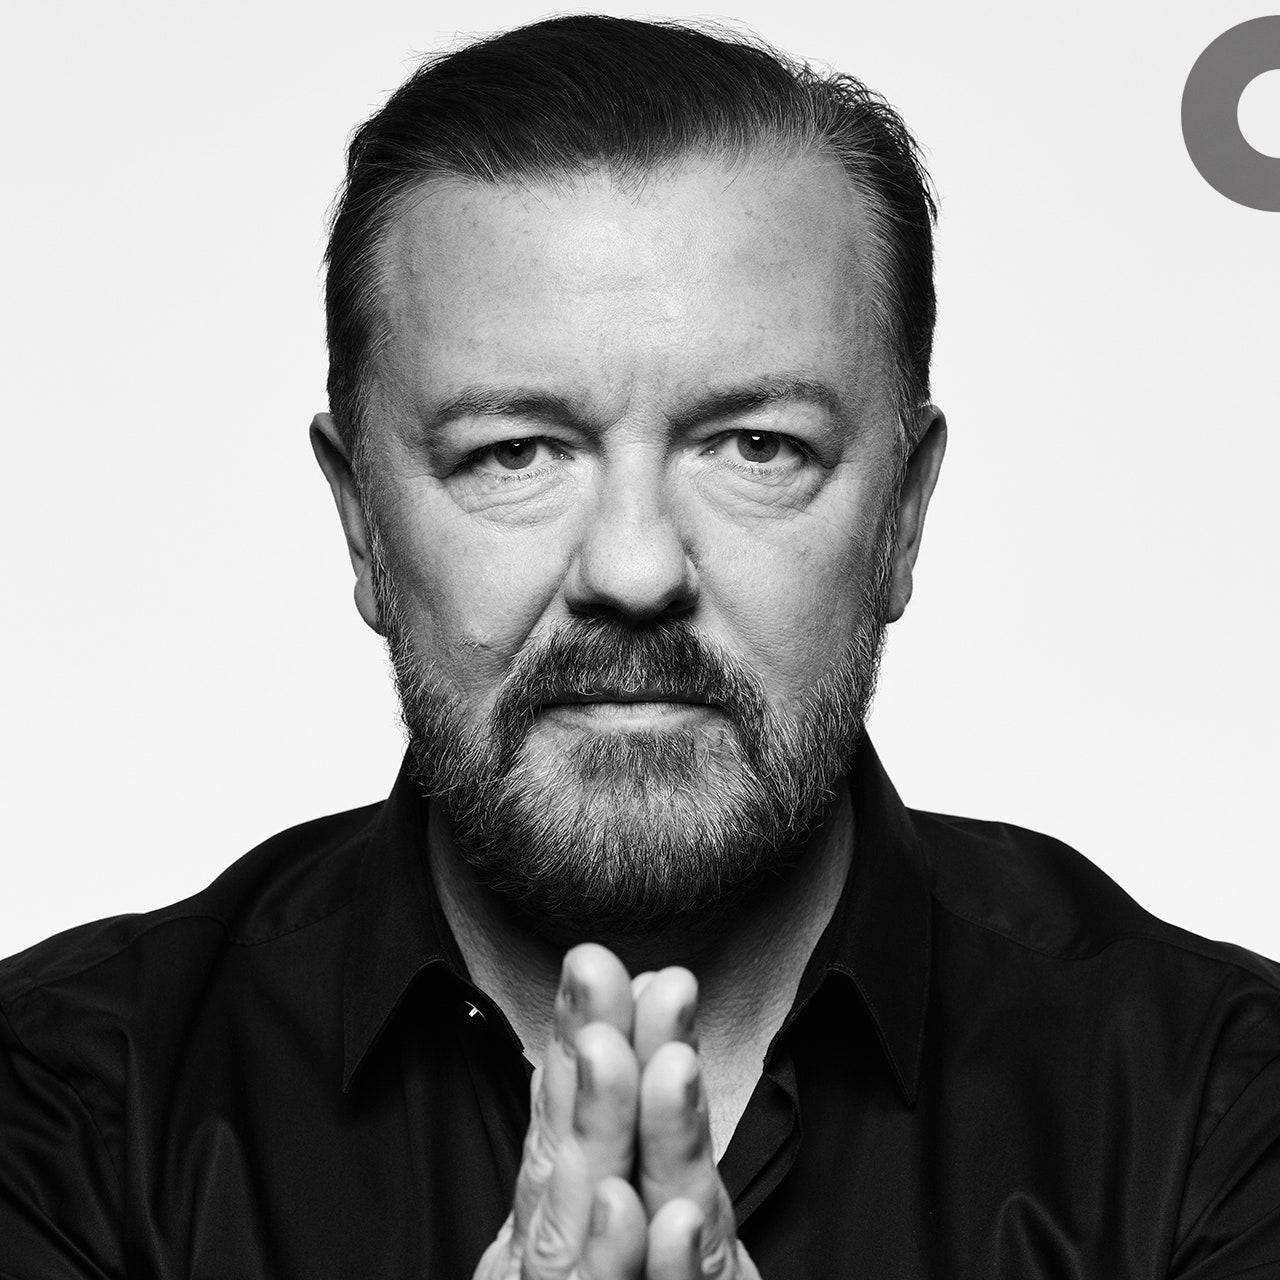 Ricky Gervais Net Worth His Career, Personal Life, Awards & Shows on